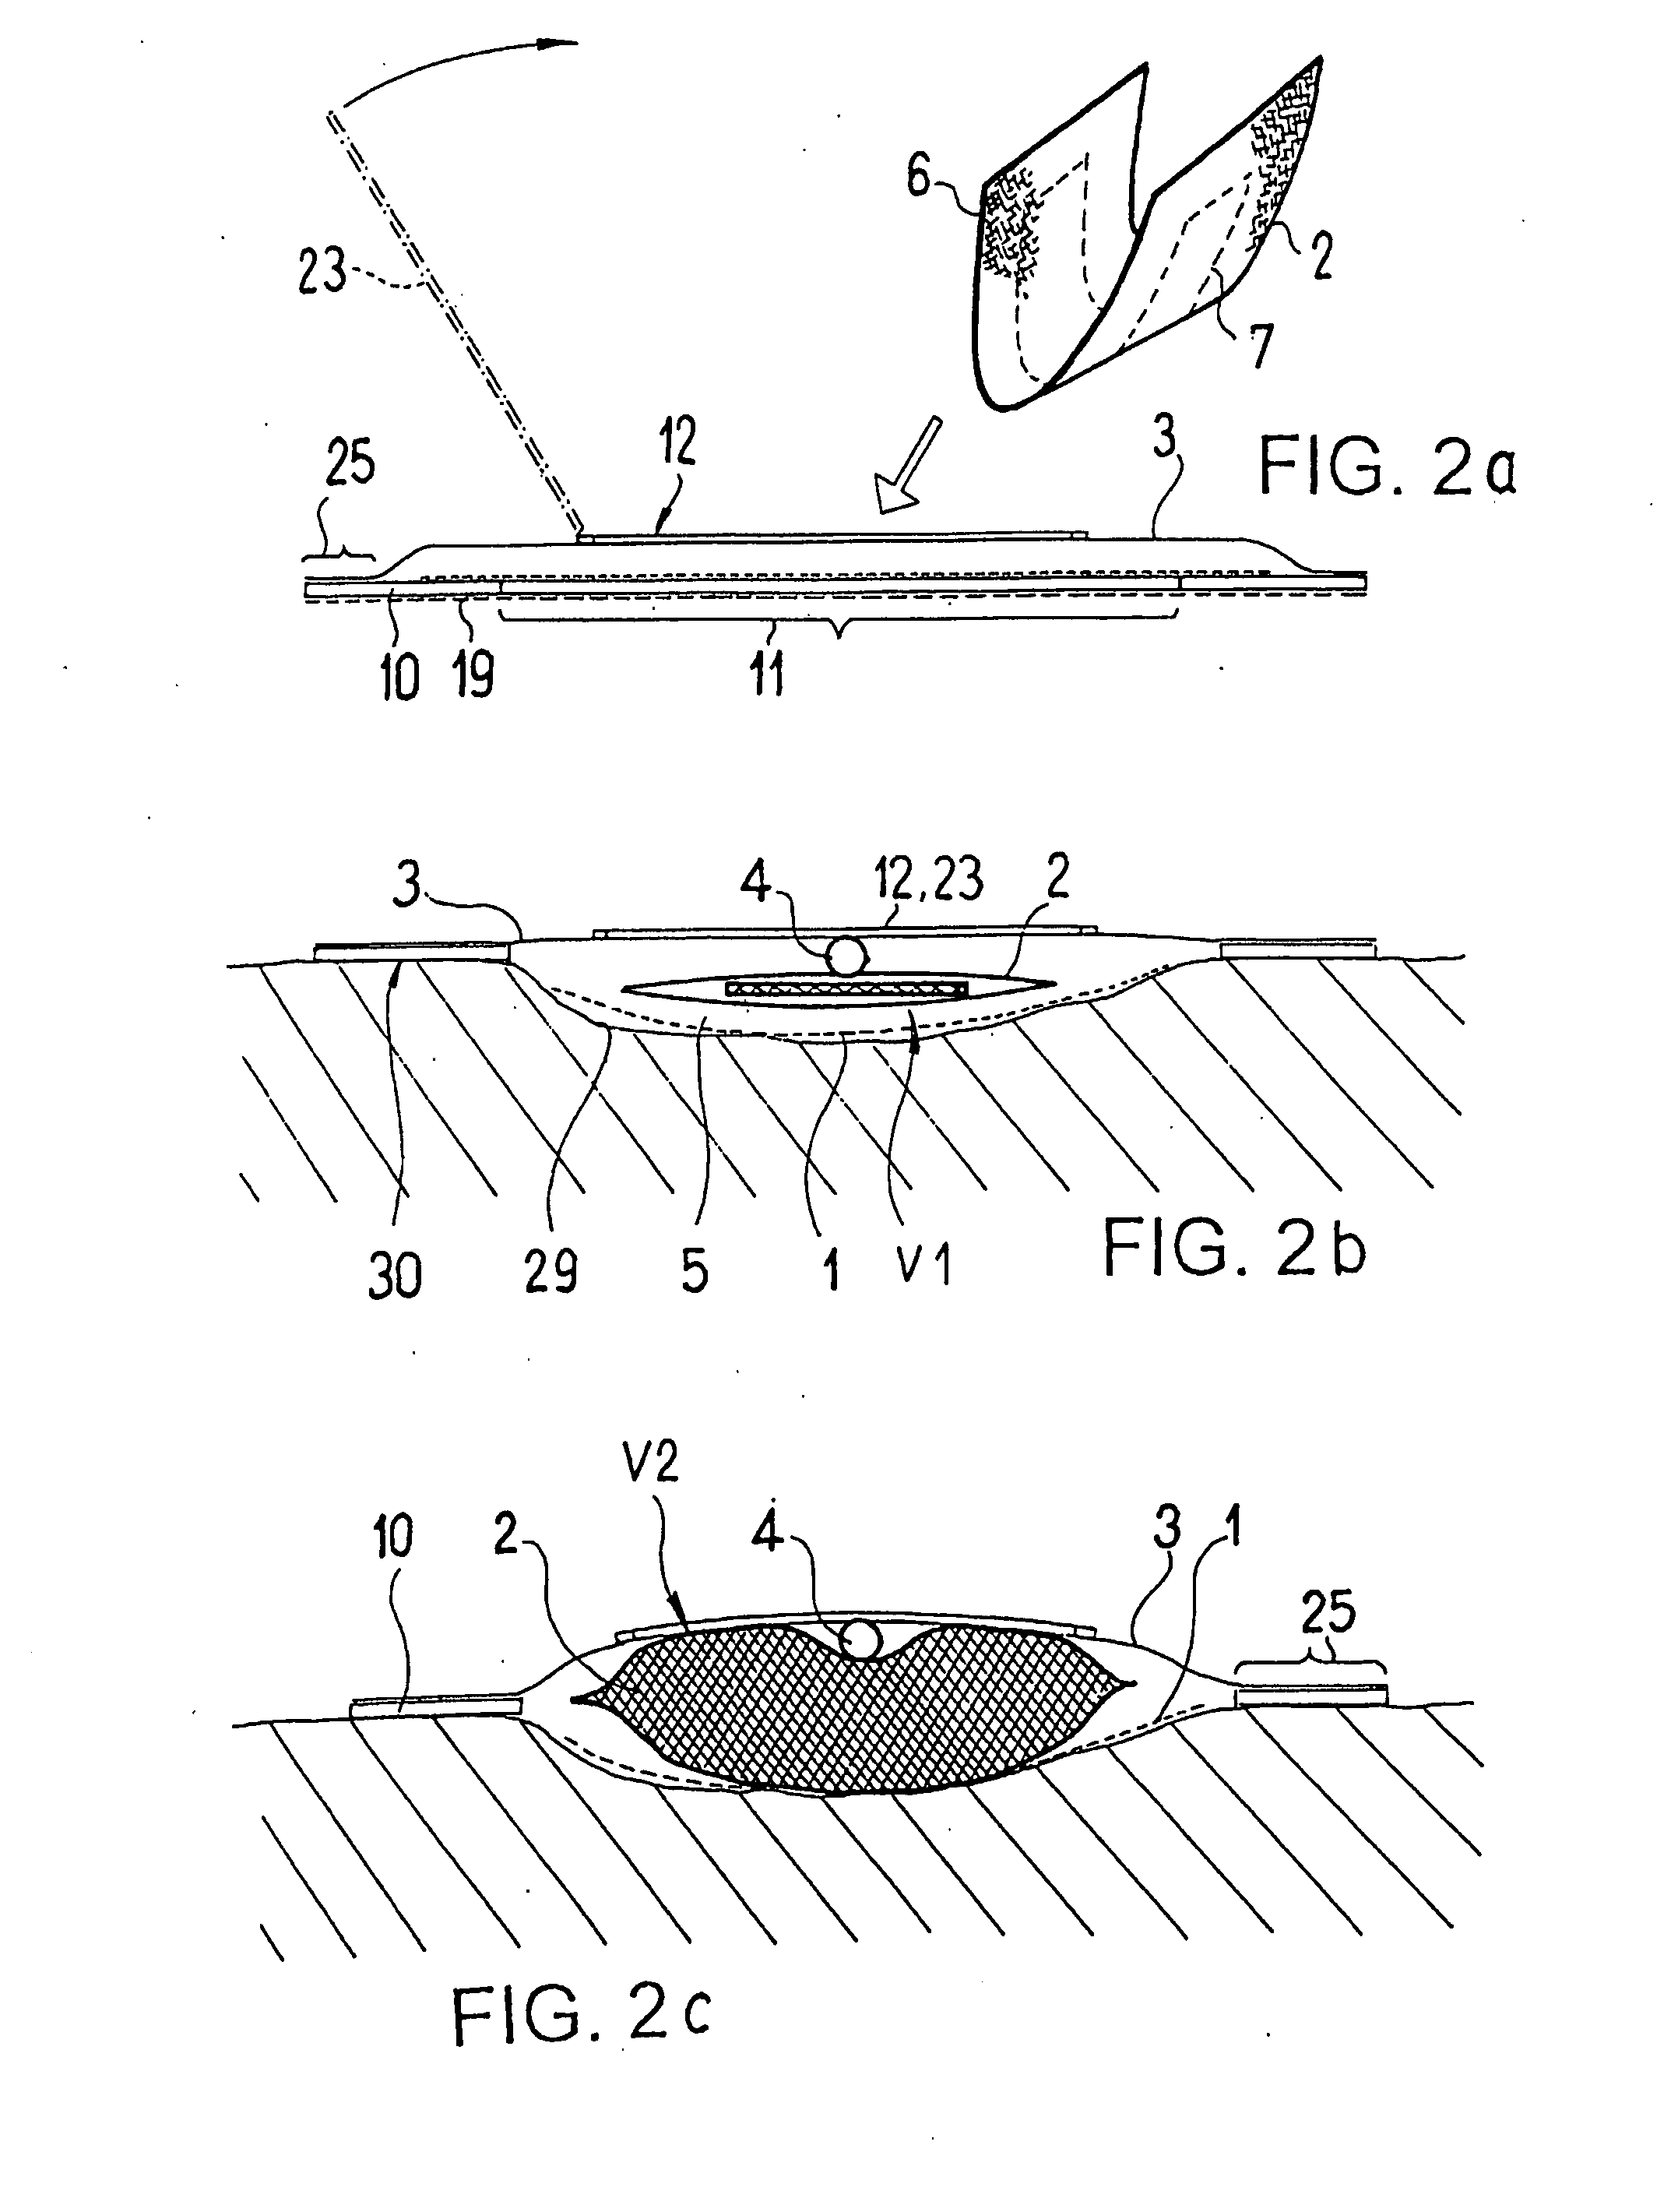 Drainage Device for the Treating Wounds Using a Reduced Pressure